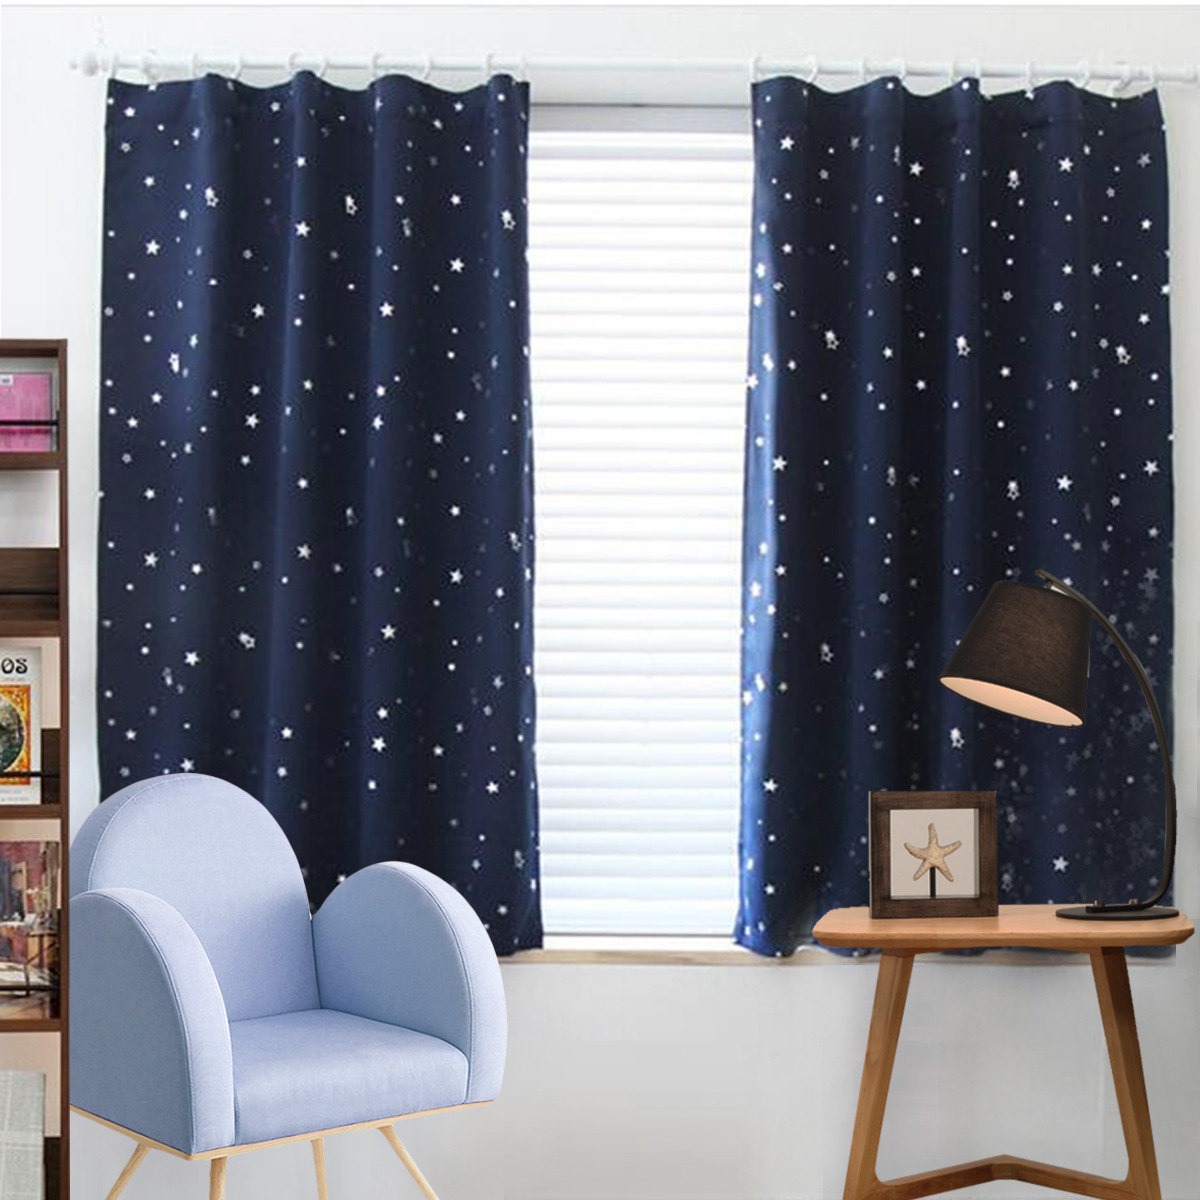 Star Thermal Blackout Curtains Hooks/Eyelet Ready Made for Kids Boys